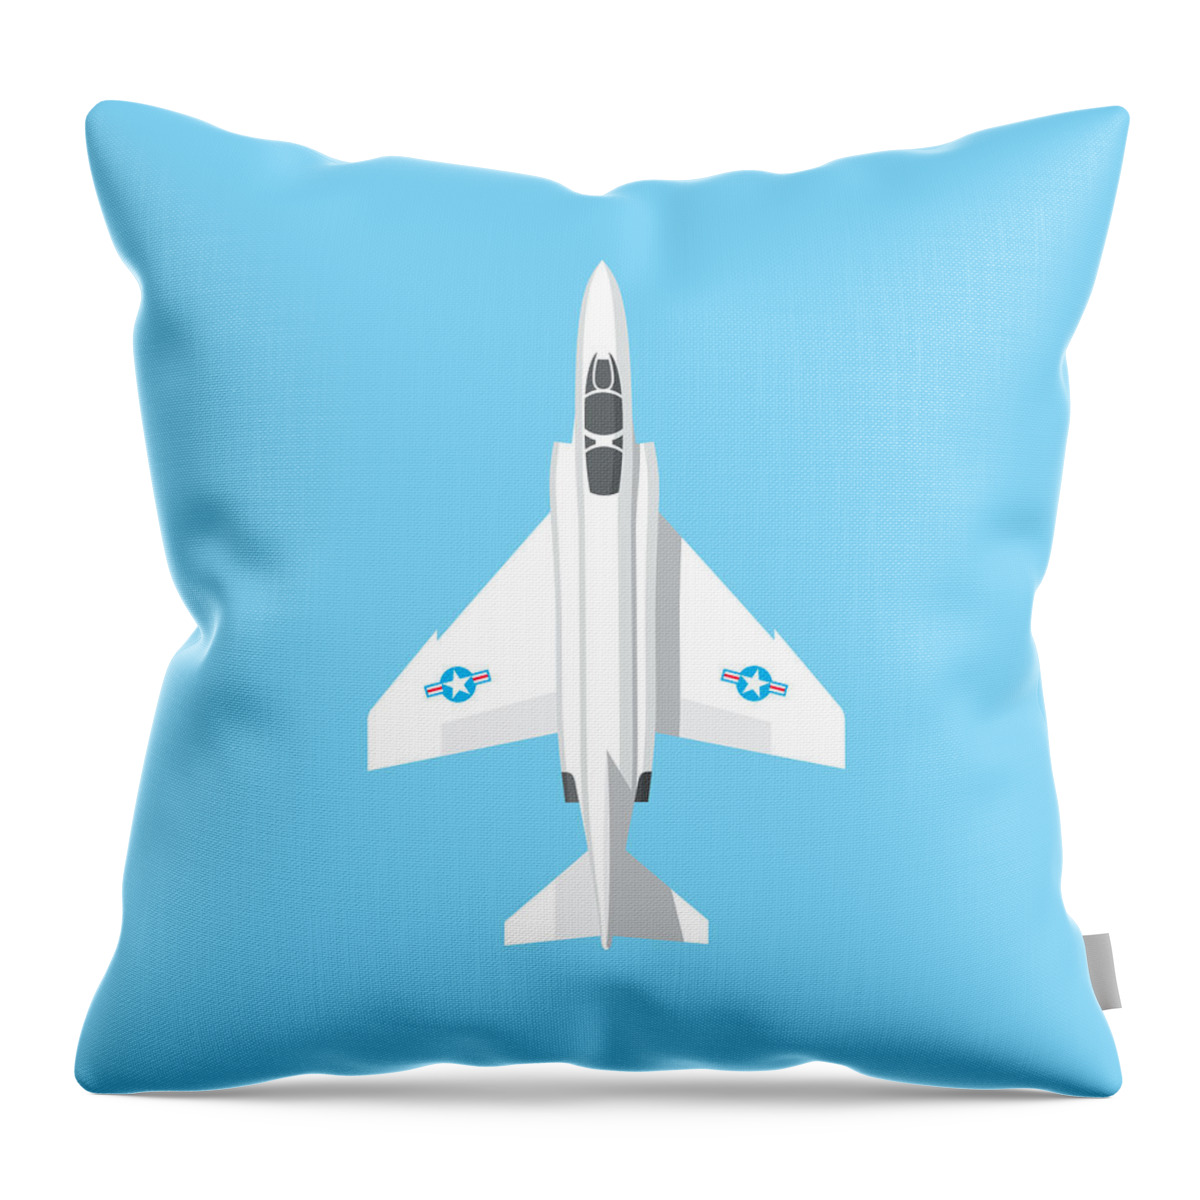 Jet Throw Pillow featuring the digital art F4 Phantom Jet Fighter Aircraft - Sky by Organic Synthesis